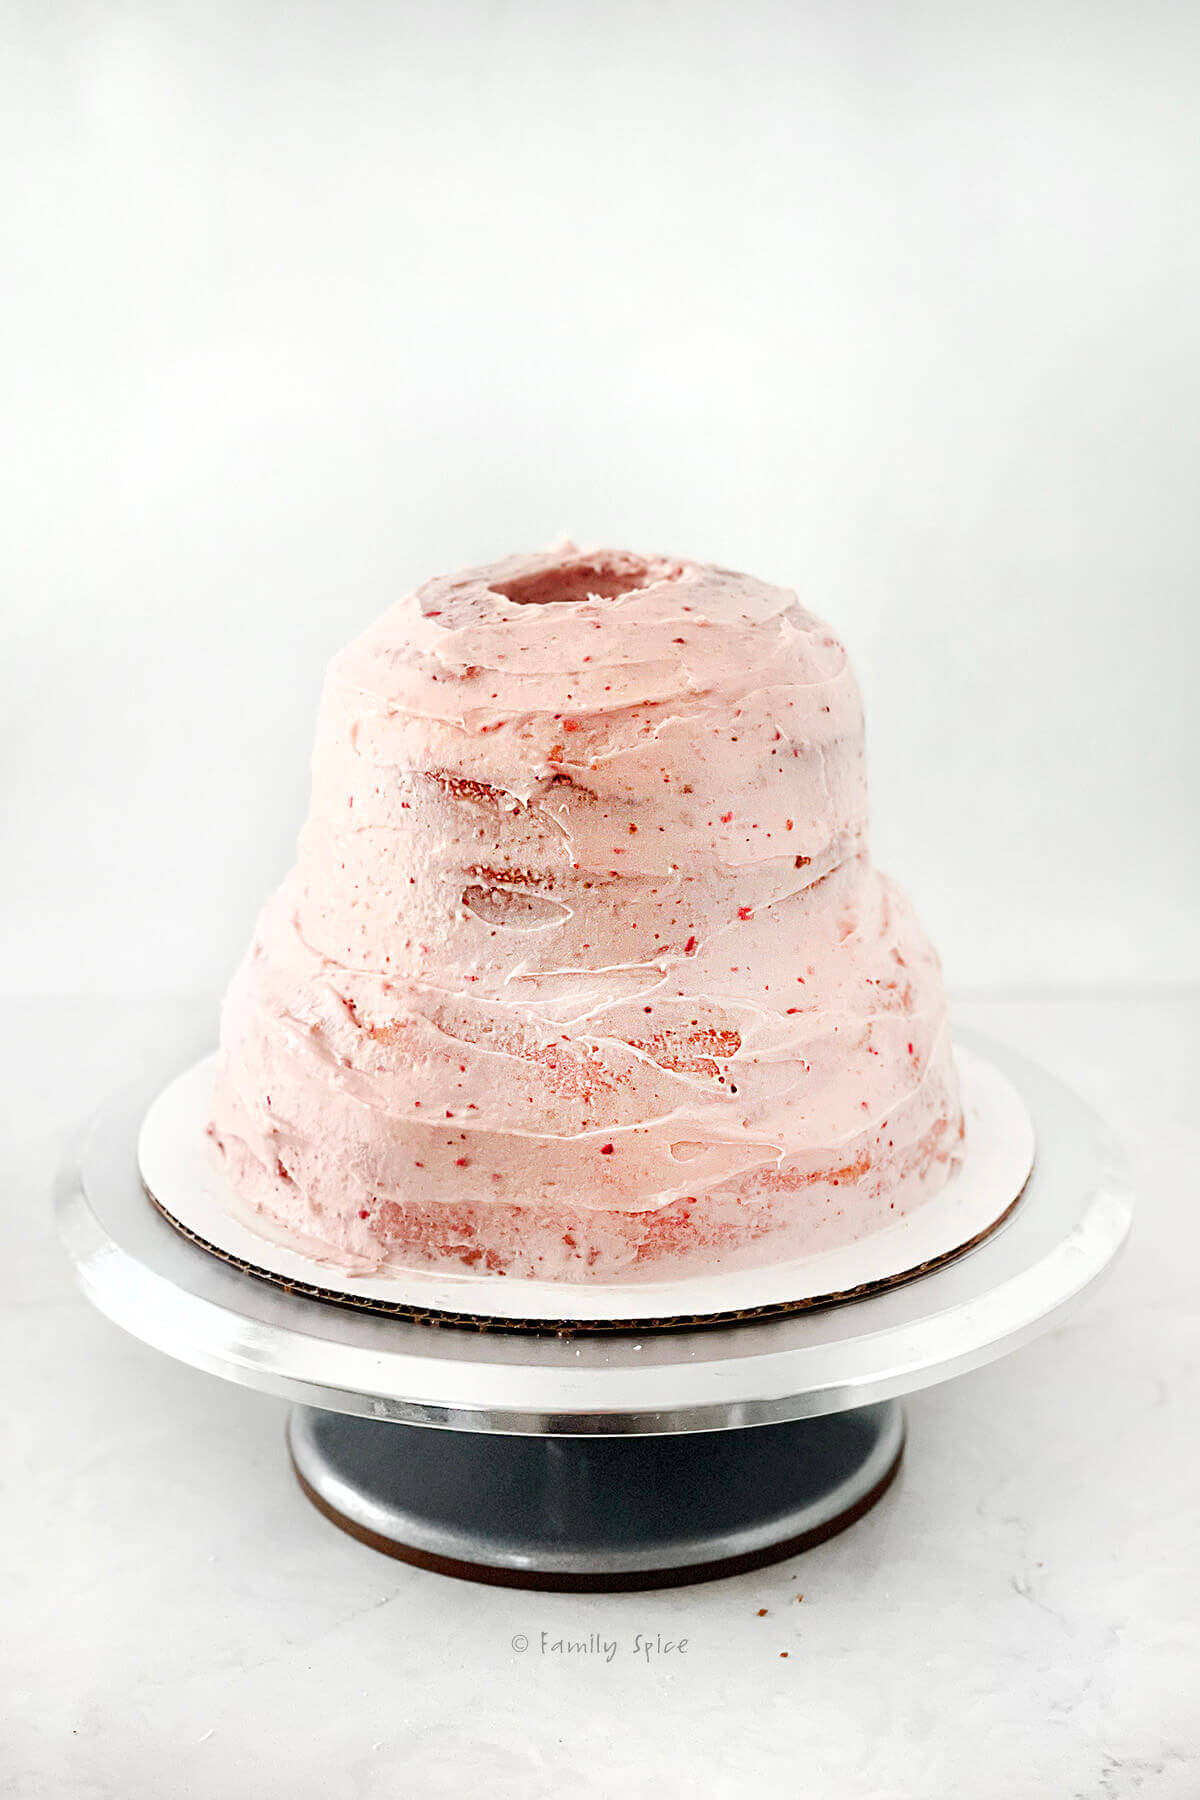 A strawberry cake in a bell shape with the center hollowed out and lightly frosted with strawberry buttercream frosting on a metal cake stand